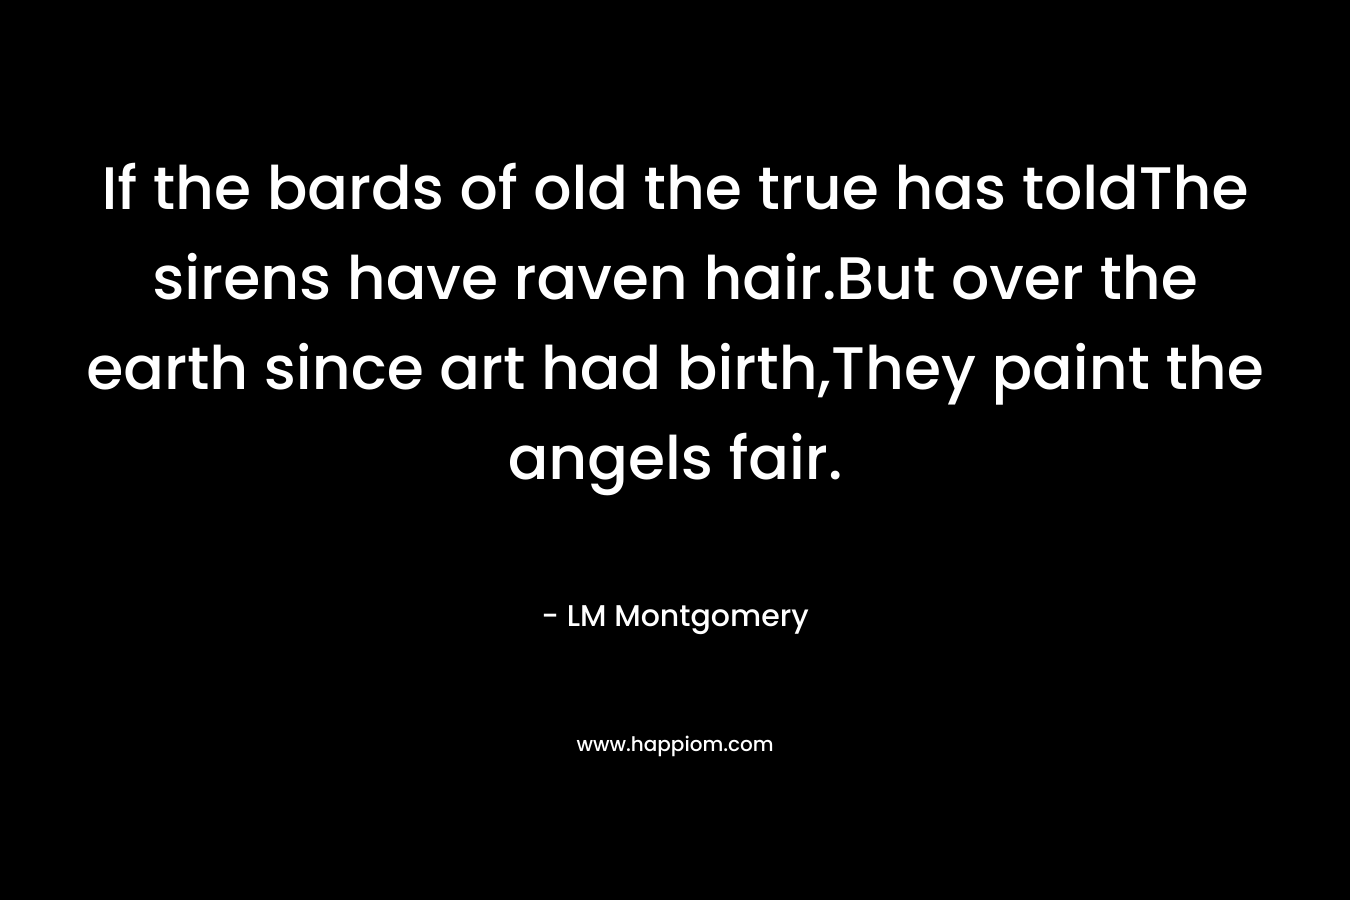 If the bards of old the true has toldThe sirens have raven hair.But over the earth since art had birth,They paint the angels fair.